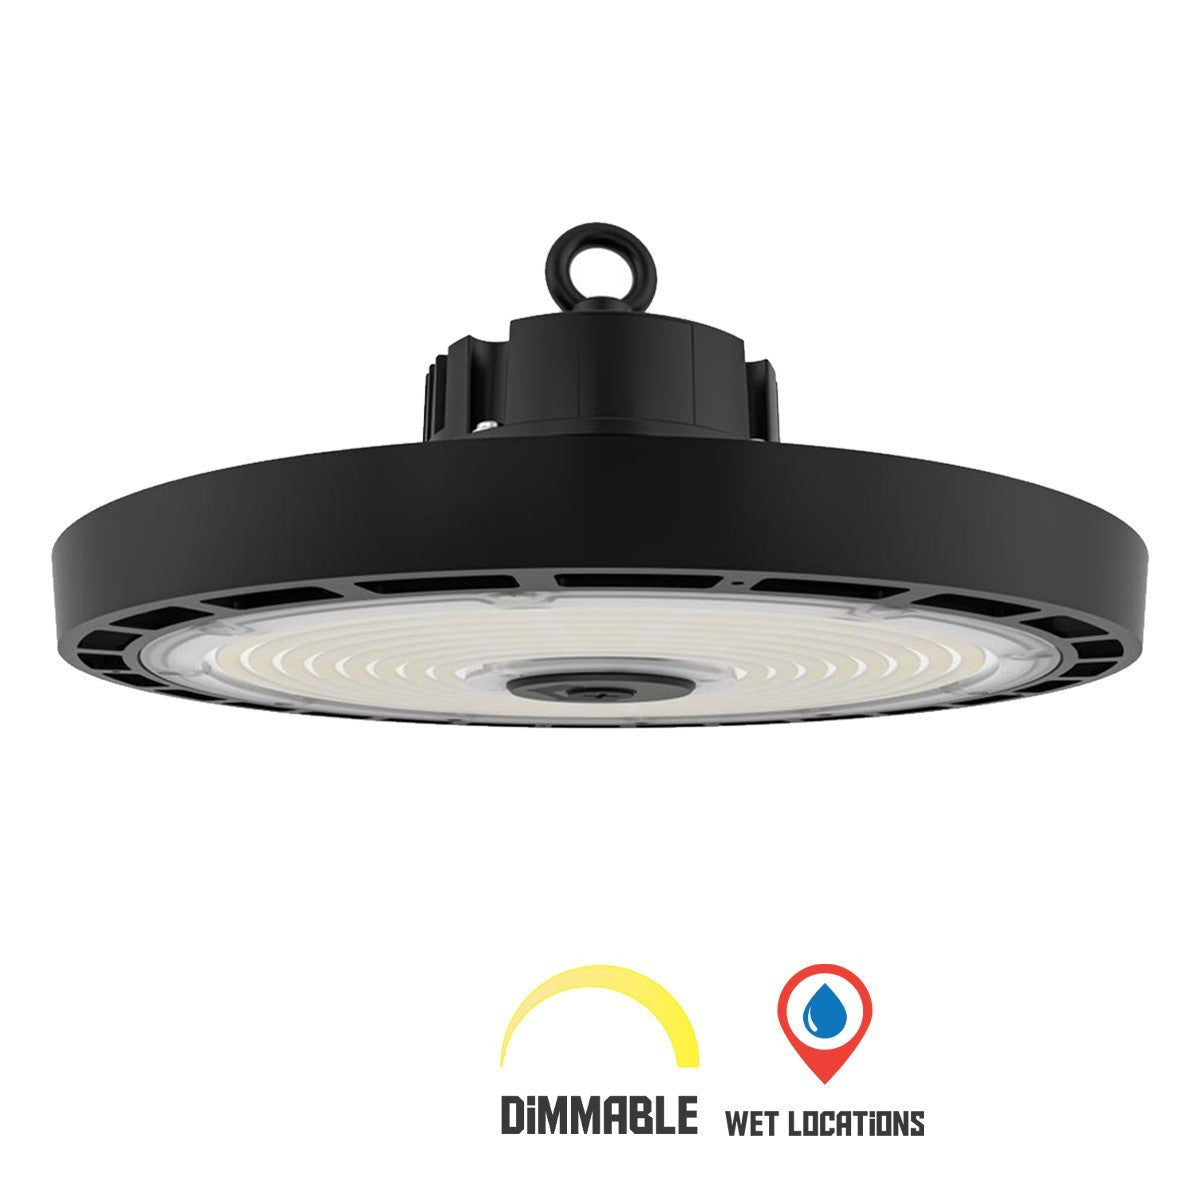 Cloche LED UFO industrielle ULTRA 150W puce OSRAM 22500Lm 0/10V IP65